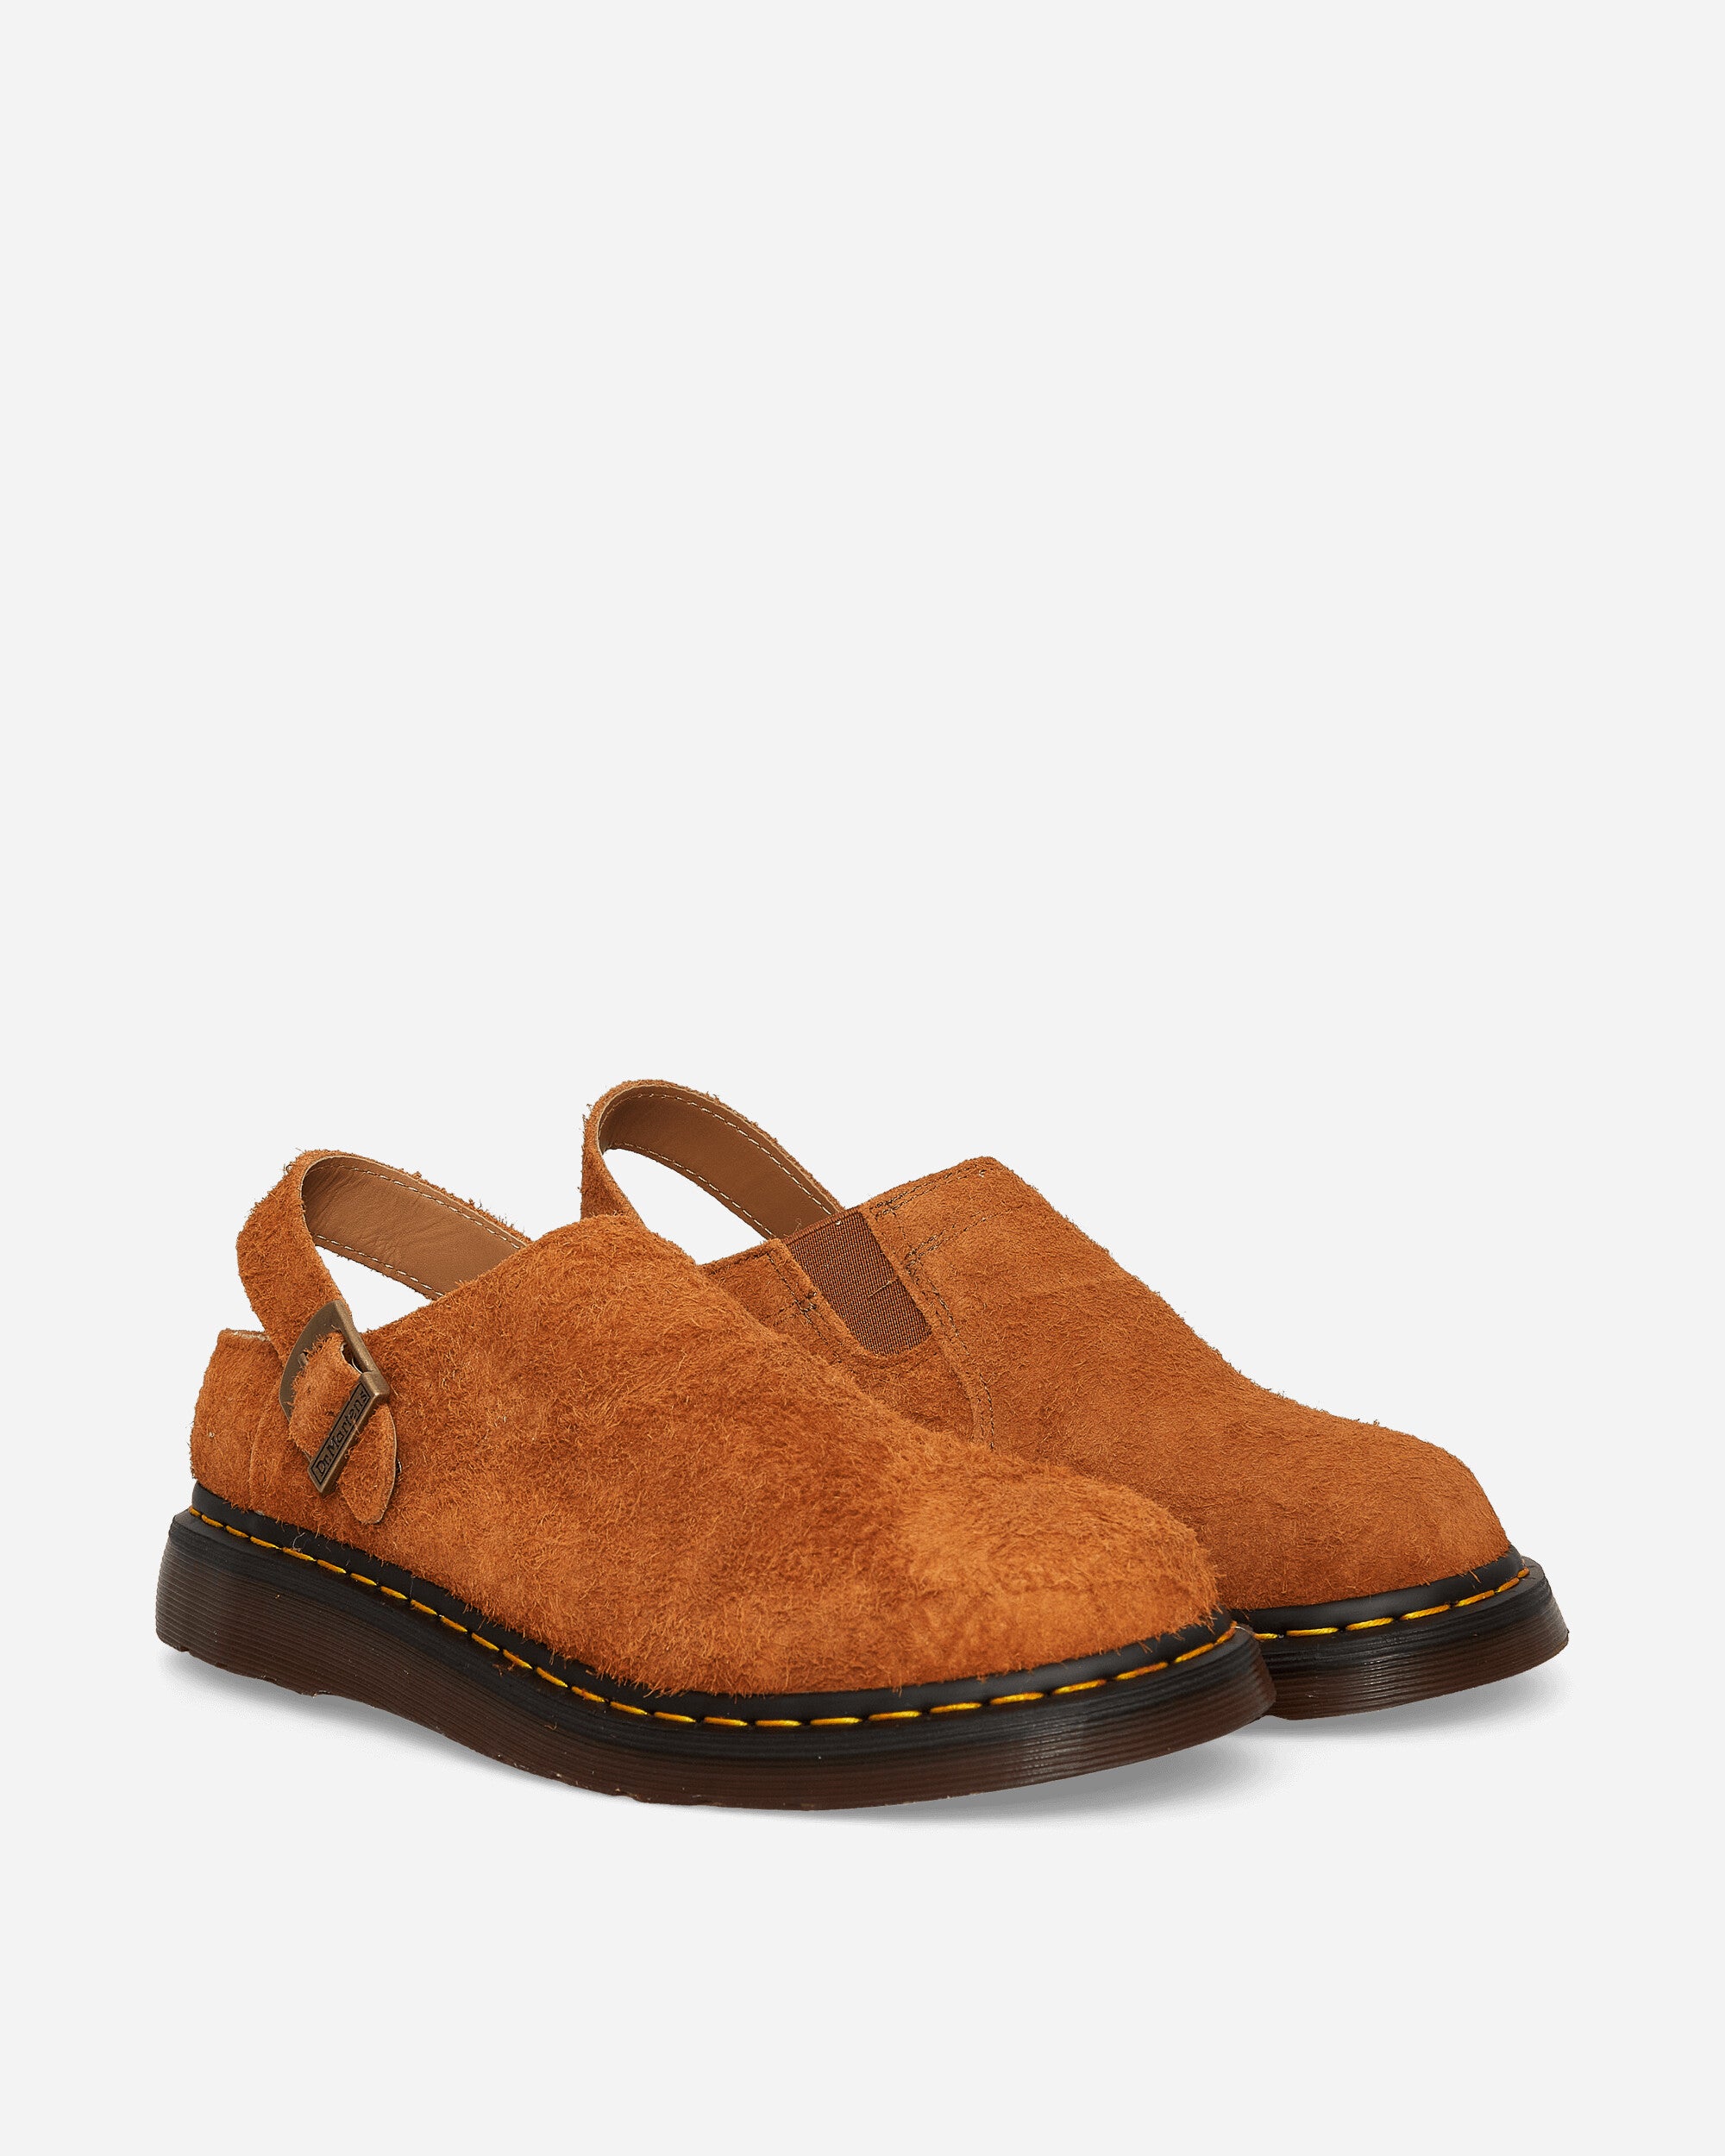 Dr. Martens Buckle Mule Isham Pecan Brown Napped Suede Sandals and Slides Sandals and Mules 30901363 001